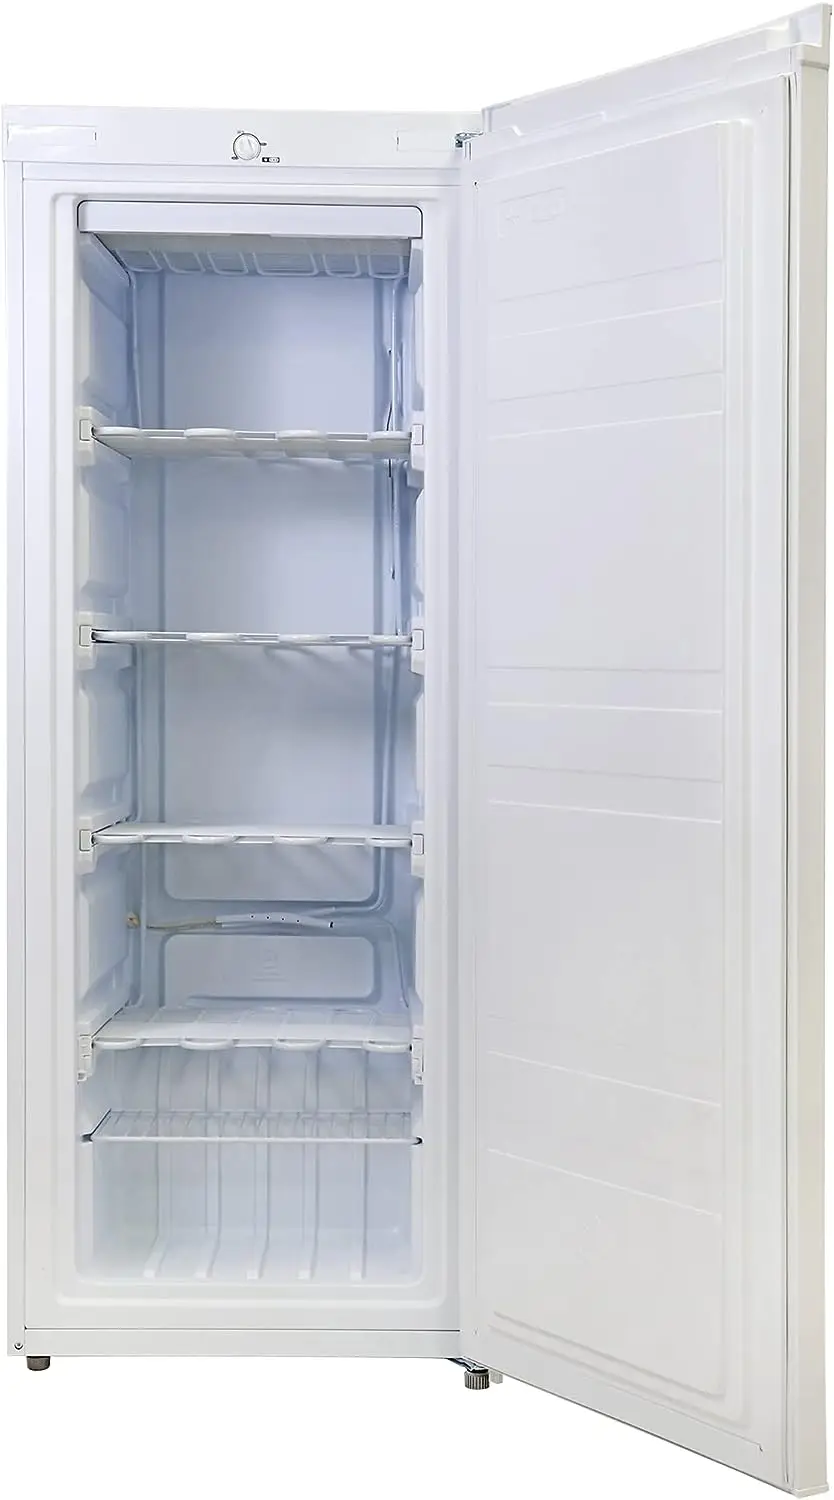 

Upright Freezer, 5.3 cu ft (150L), White, Manual Defrost Design, Space-Saving Flat Back, Reversible Door, for Home, Apartment, C